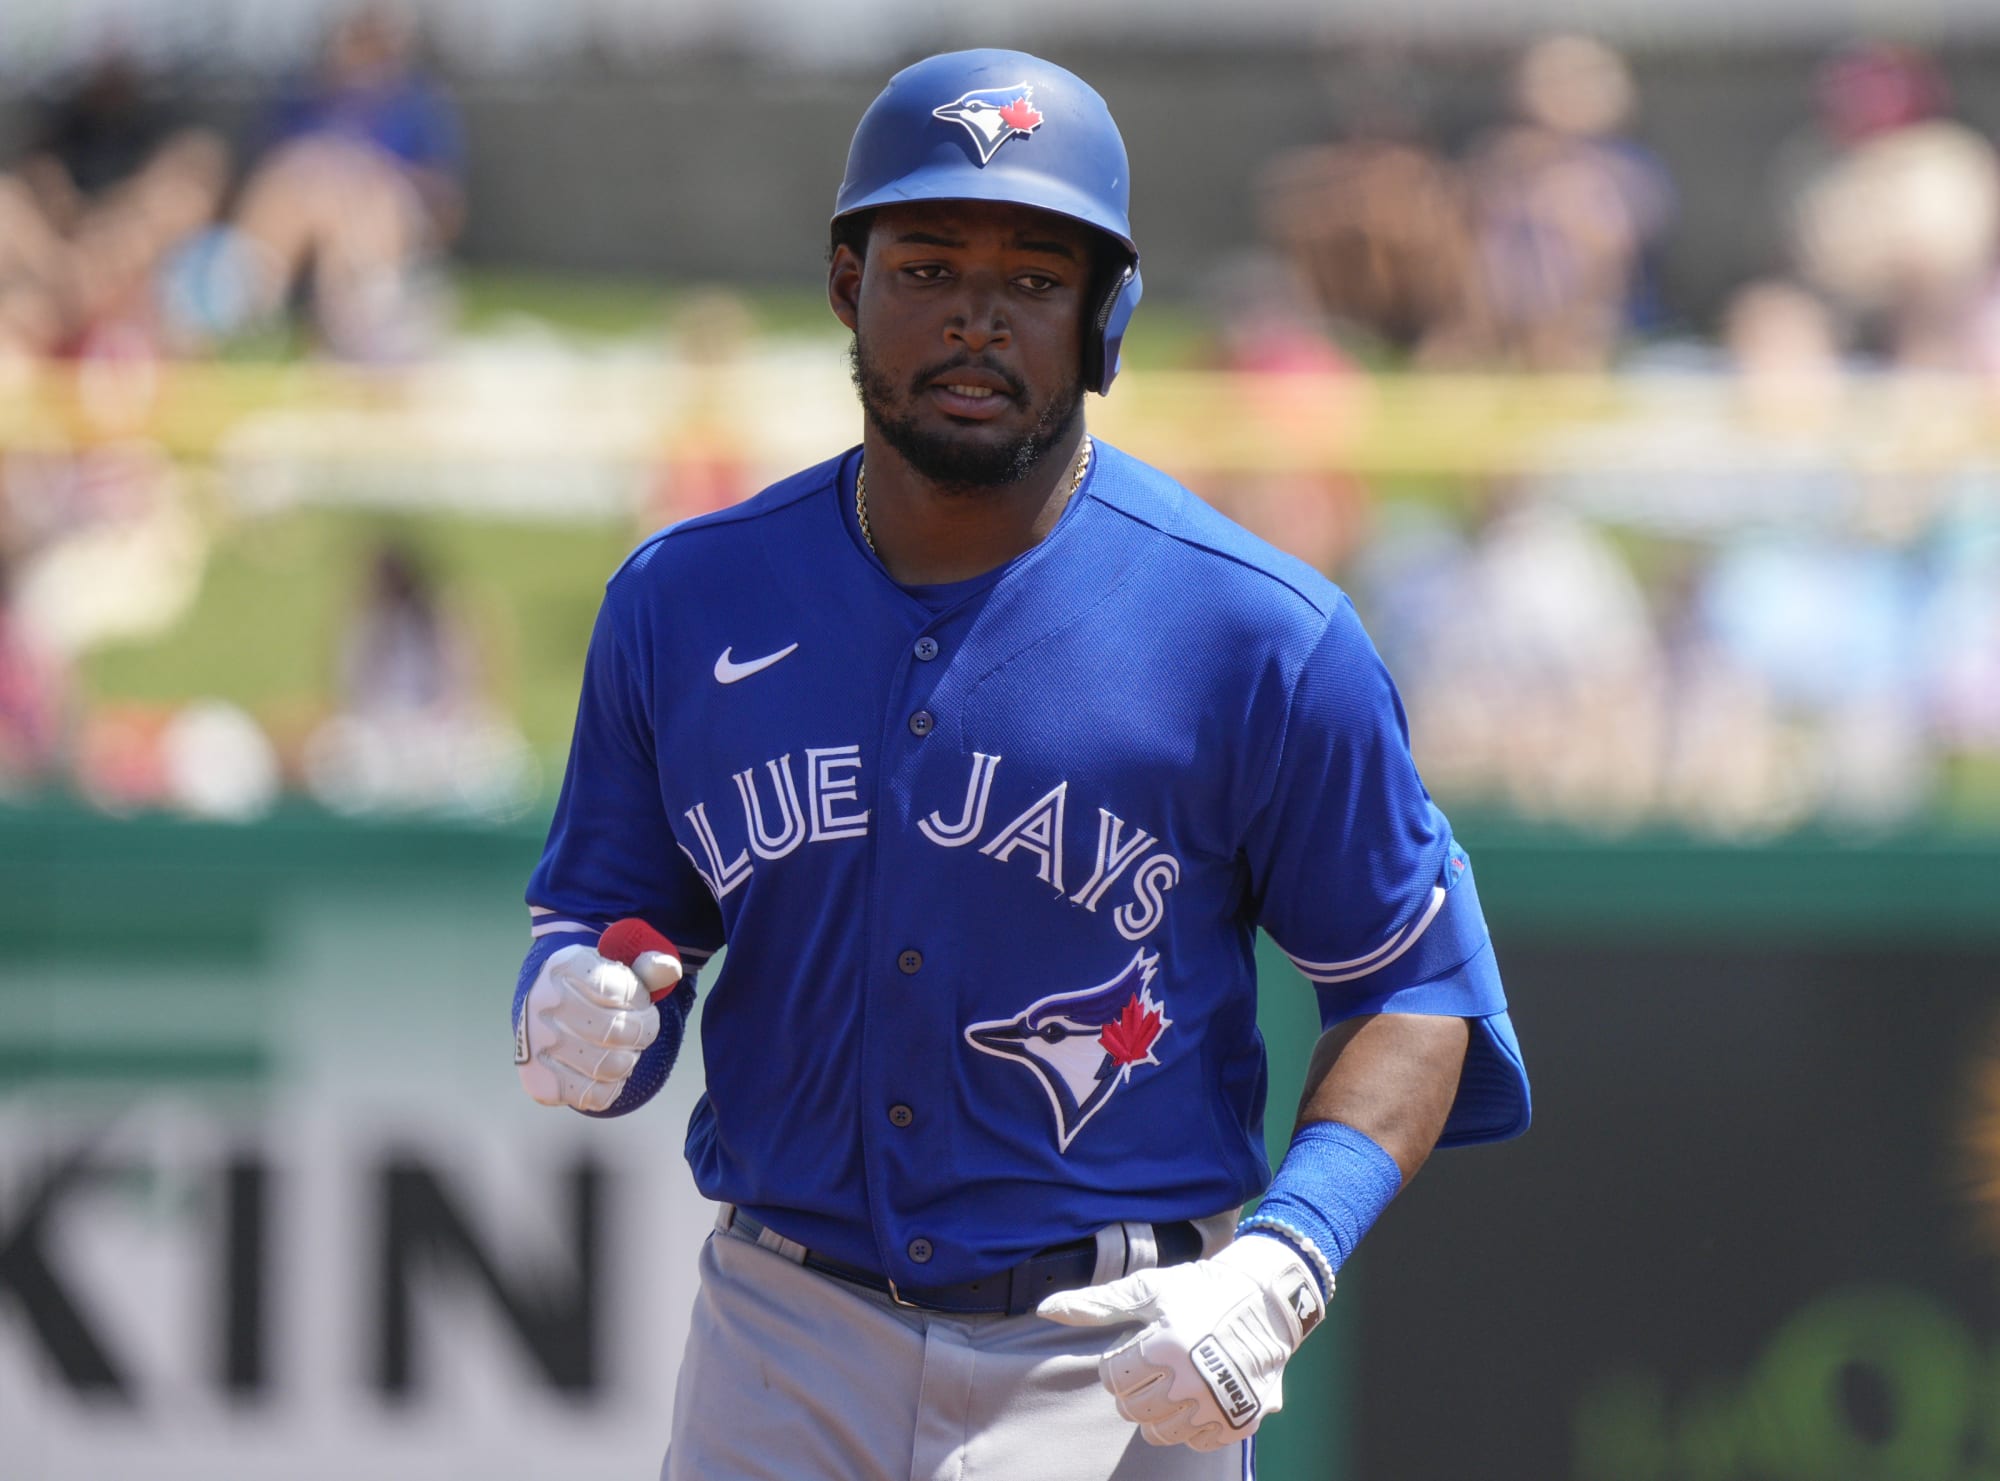 Blue Jays: Prospects that are at risk of being selected in the Rule 5 Draft